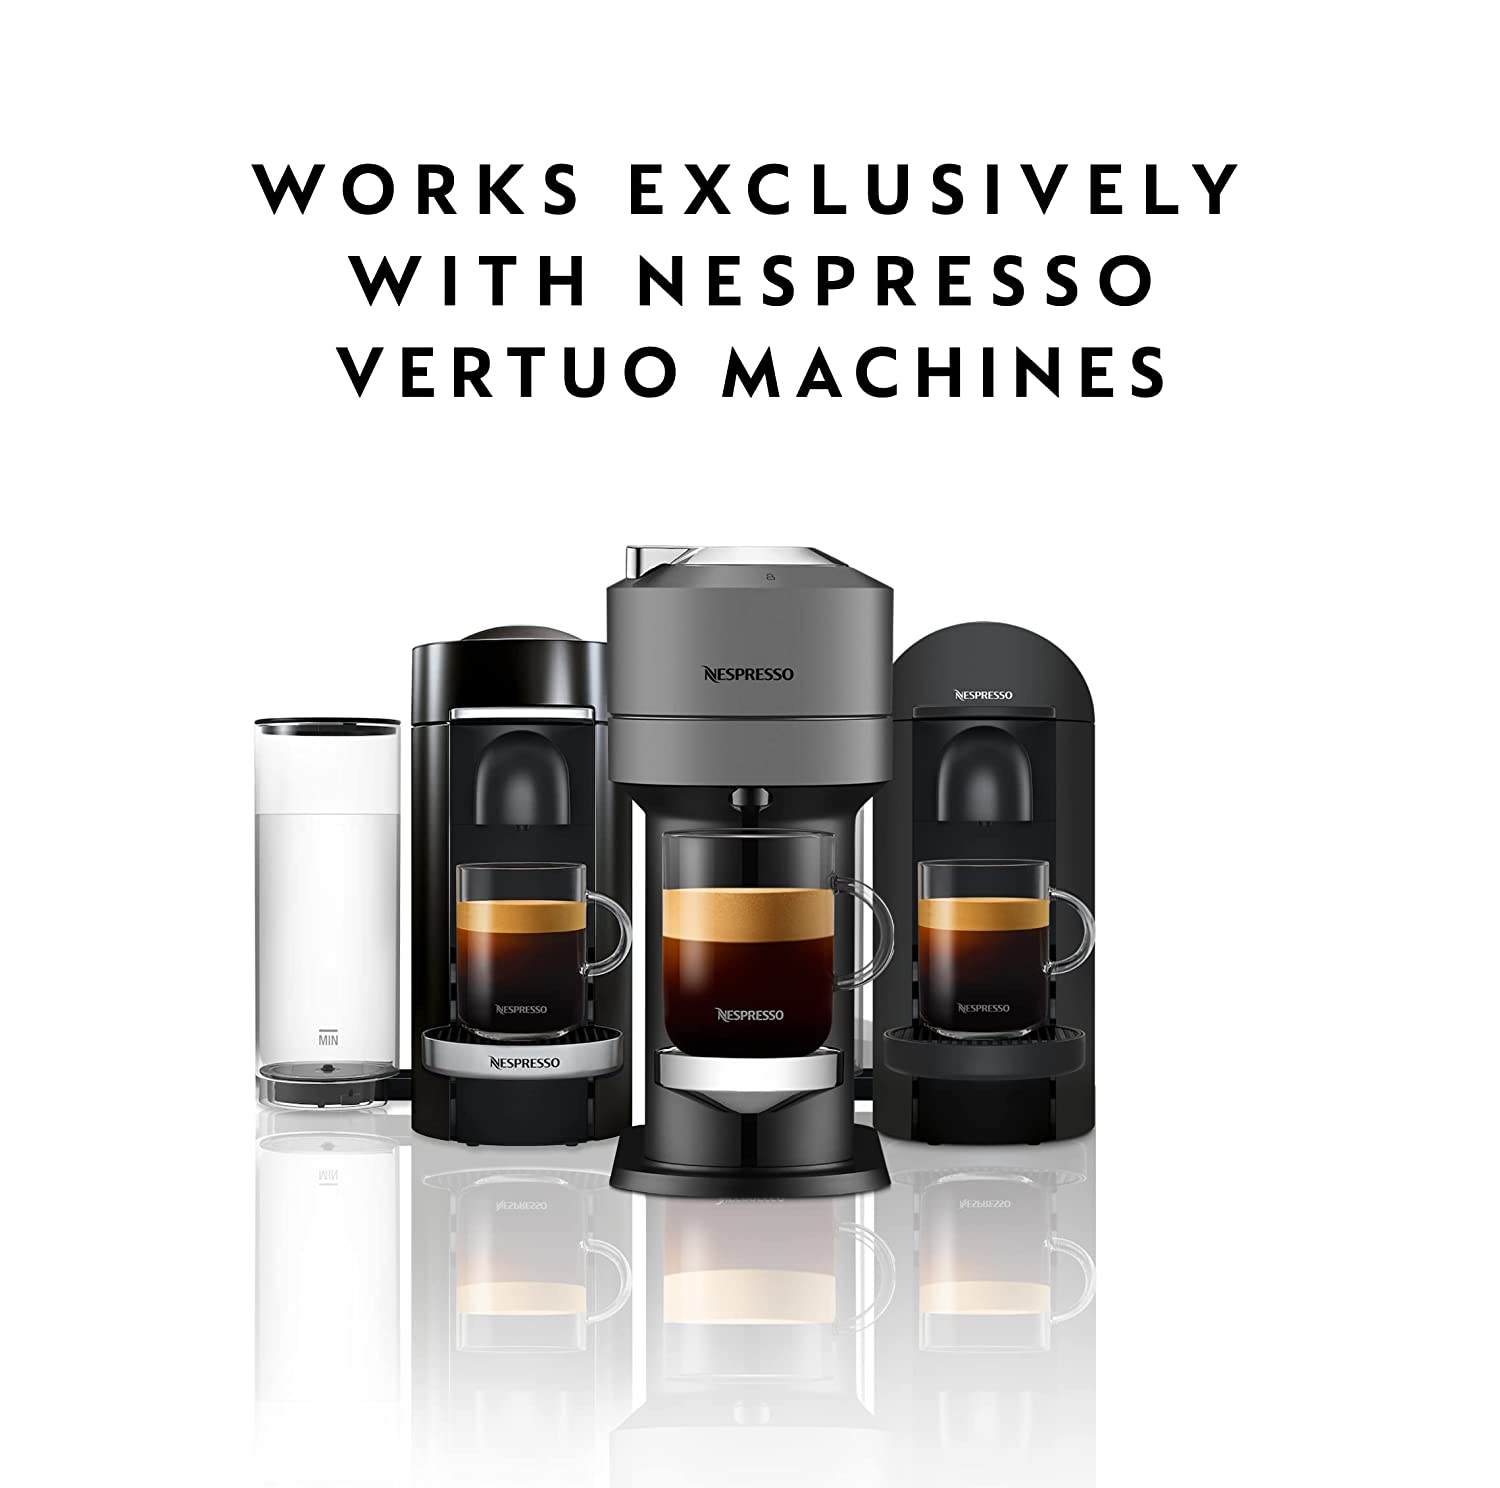 Nespresso Capsules VertuoLine, Espresso, Bold Variety Pack, Medium and Dark Roast Espresso Coffee, 40 Count Coffee Pods, Brews (VERTUOLINE ONLY), 1.35 Ounce , 10 Count (Pack of 4)